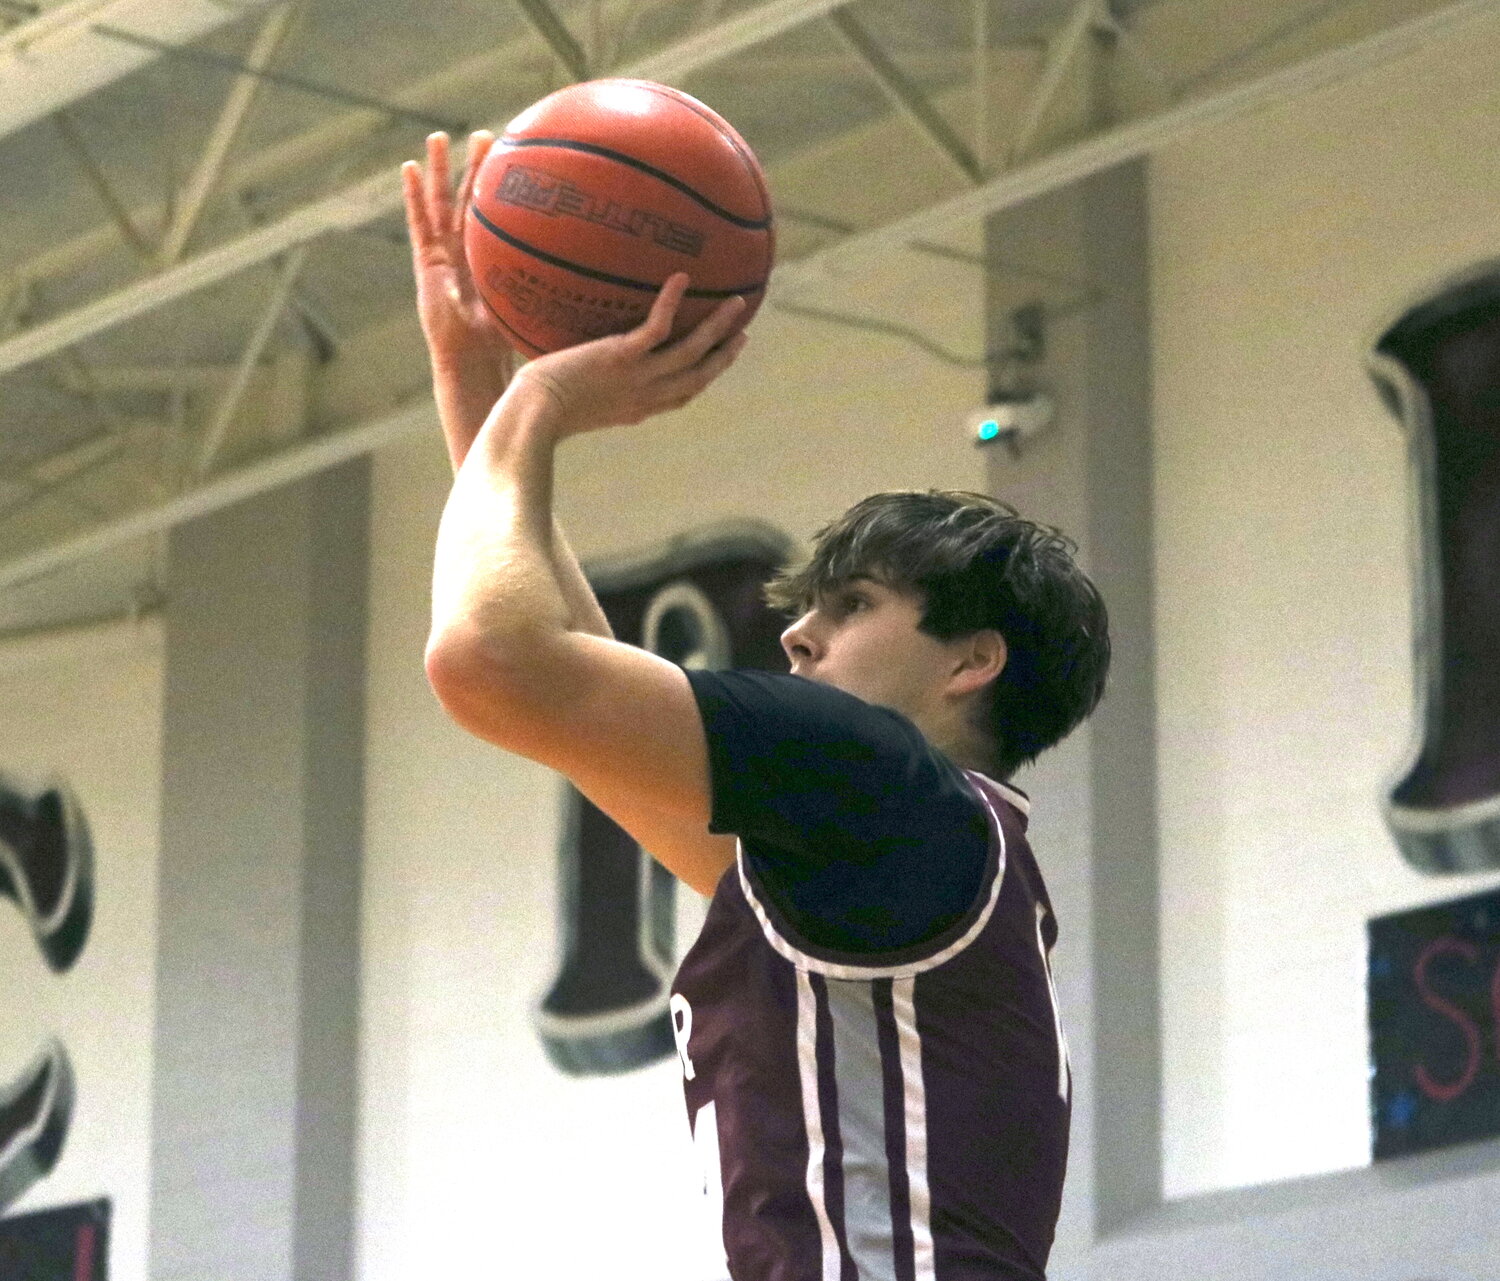 Noah Pearce shoots a 3-pointer during Friday's game between Cinco Ranch and Klein at the Cinco Ranch gym.